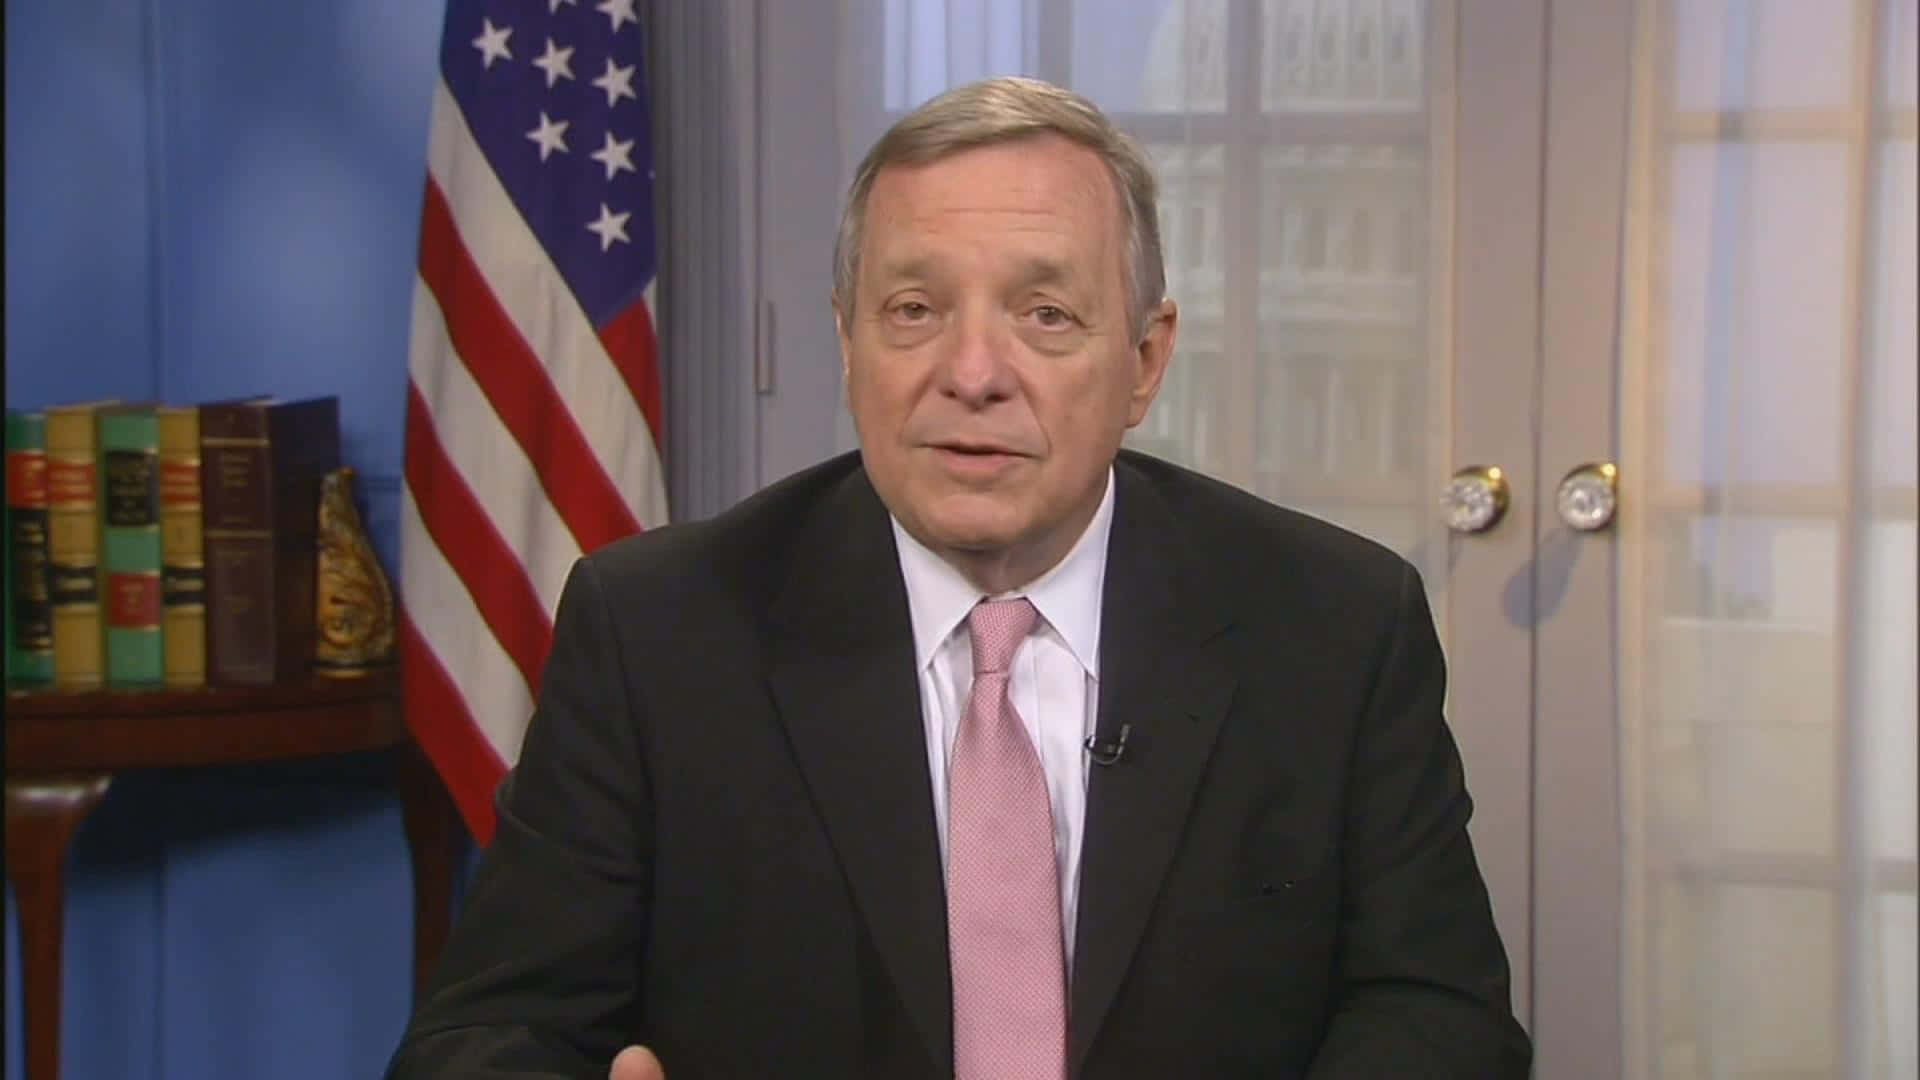 Richard Durbin With Flag In Background Wallpaper